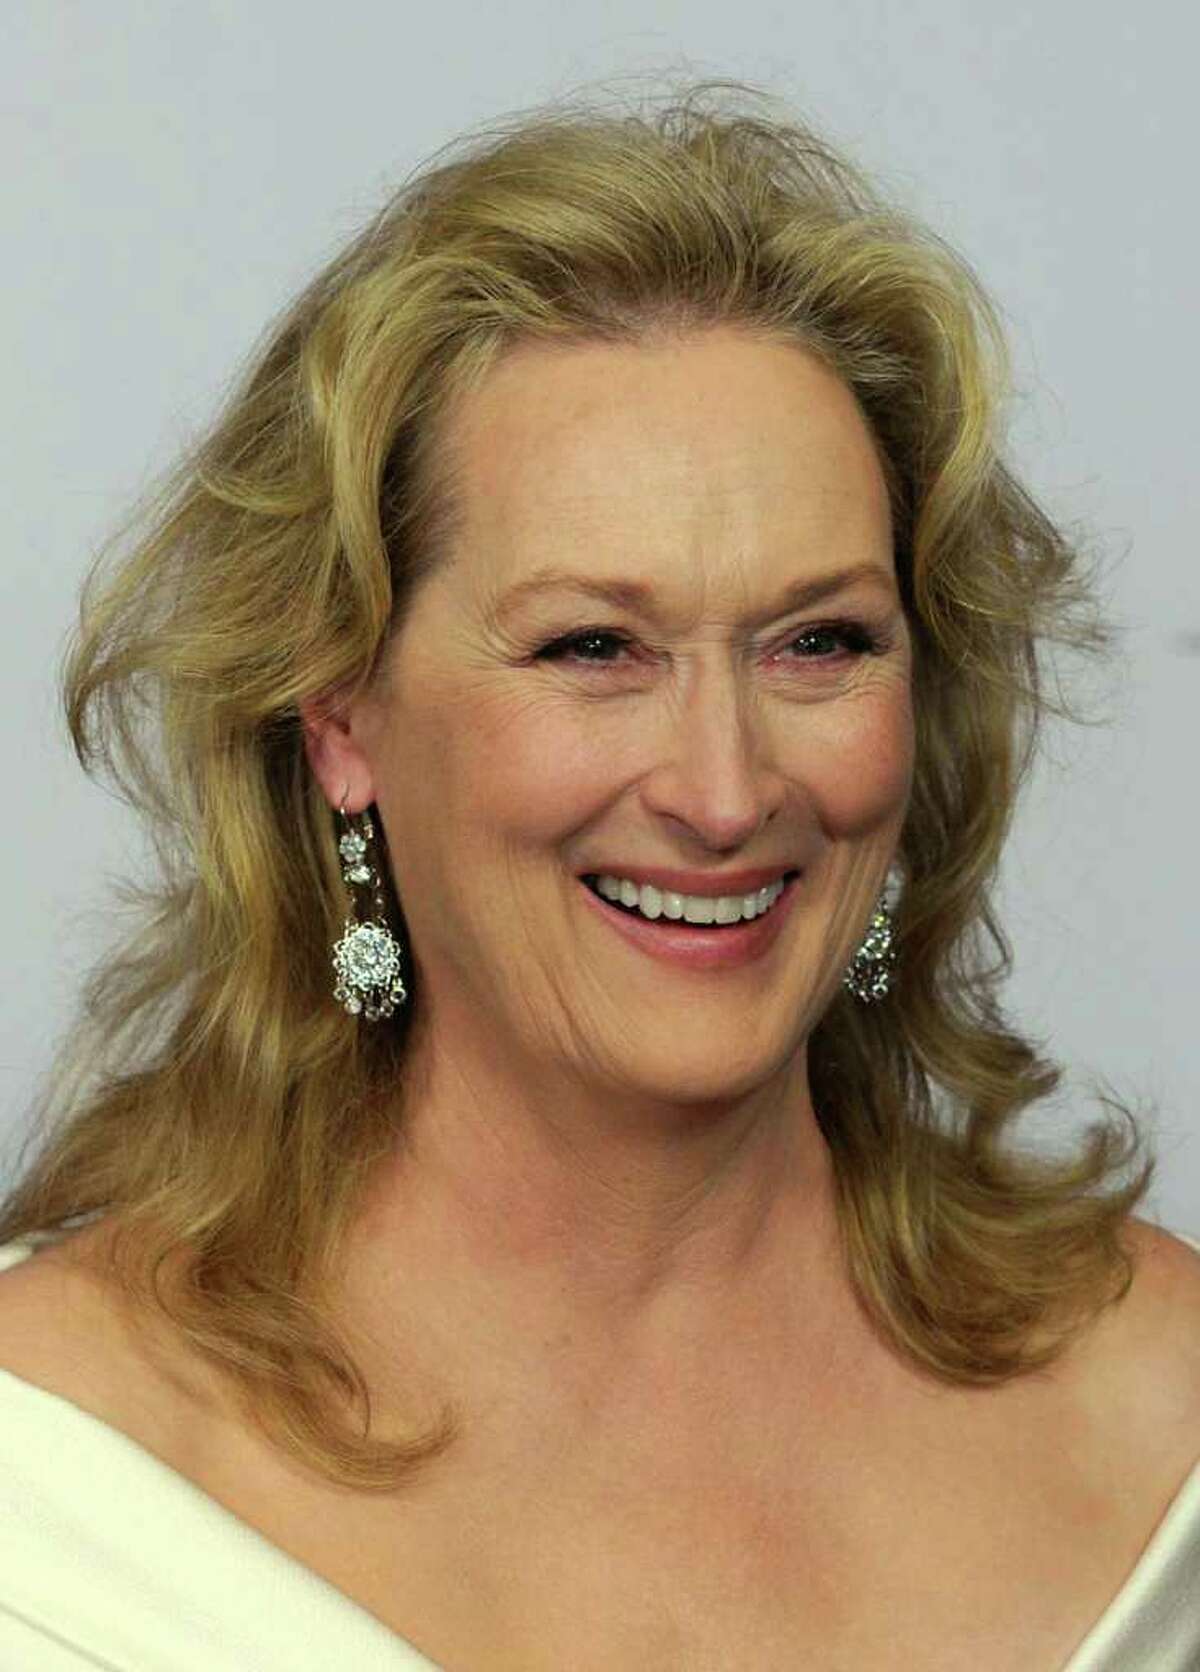 Actress Meryl Streep attends the 38th AFI Life Achievement Award June 10, 2010 in Culver City, California. Streep, who is in town filming "Great Hope Springs" with actors Tommy Lee Jones and Steve Carell, was seen having lunch at Beach House in Old Greenwich Friday afternoon. (Photo by Frazer Harrison/Getty Images for AFI)